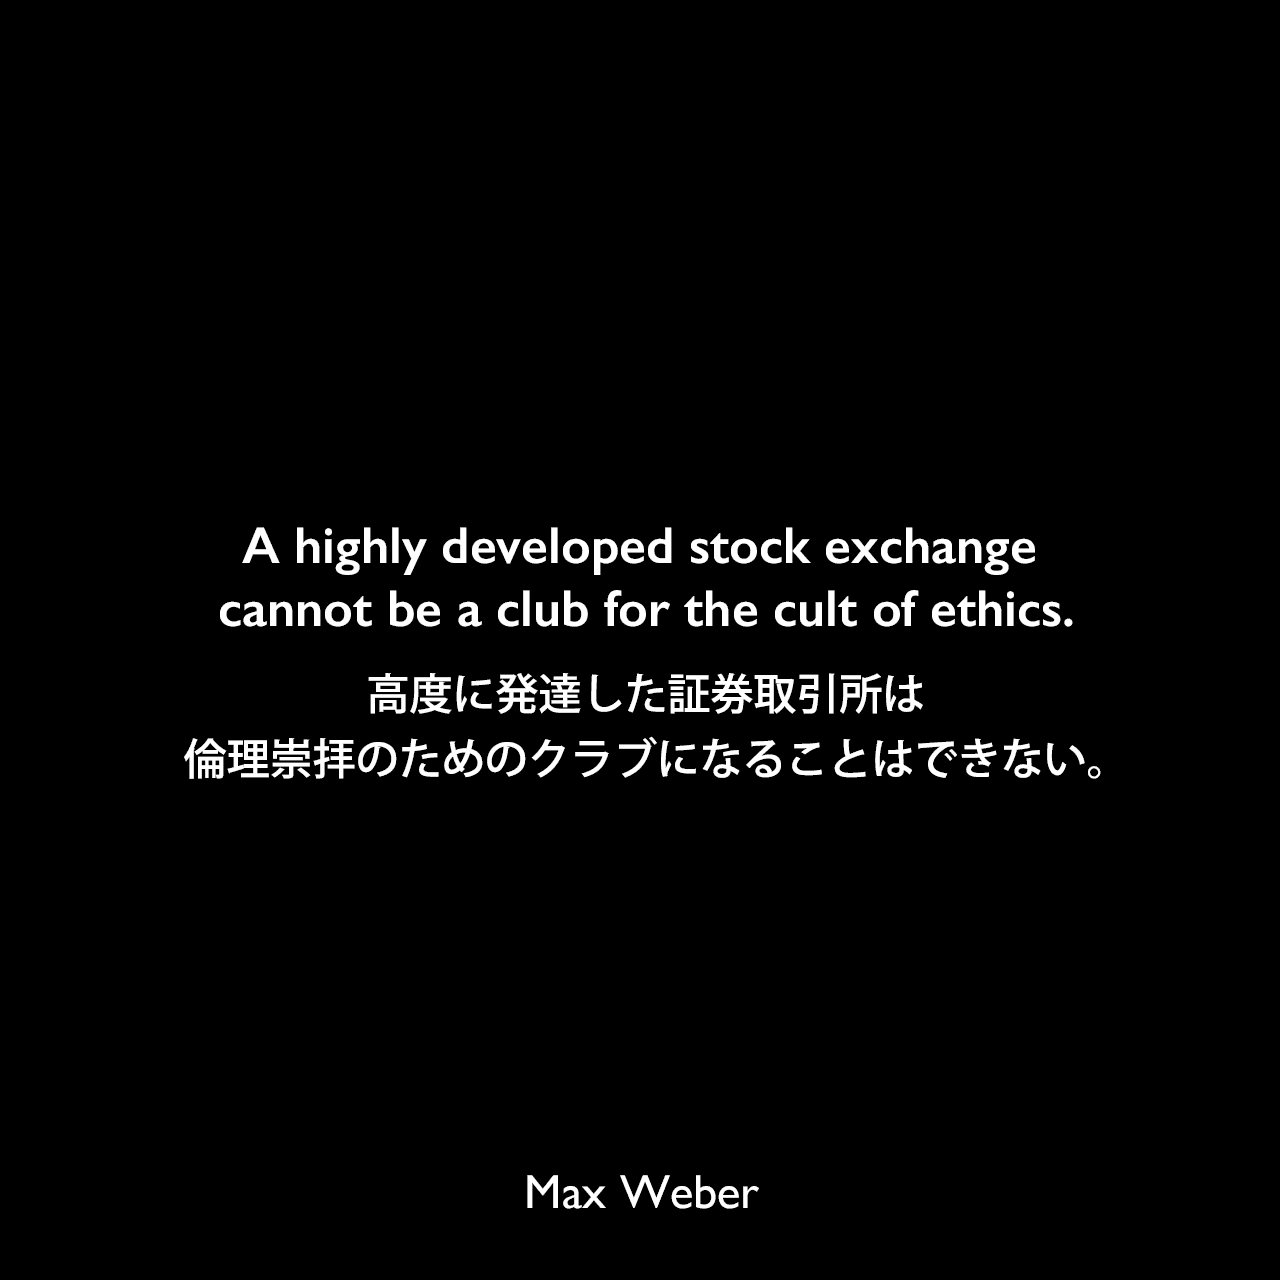 A highly developed stock exchange cannot be a club for the cult of ethics.高度に発達した証券取引所は、倫理崇拝のためのクラブになることはできない。Max Weber